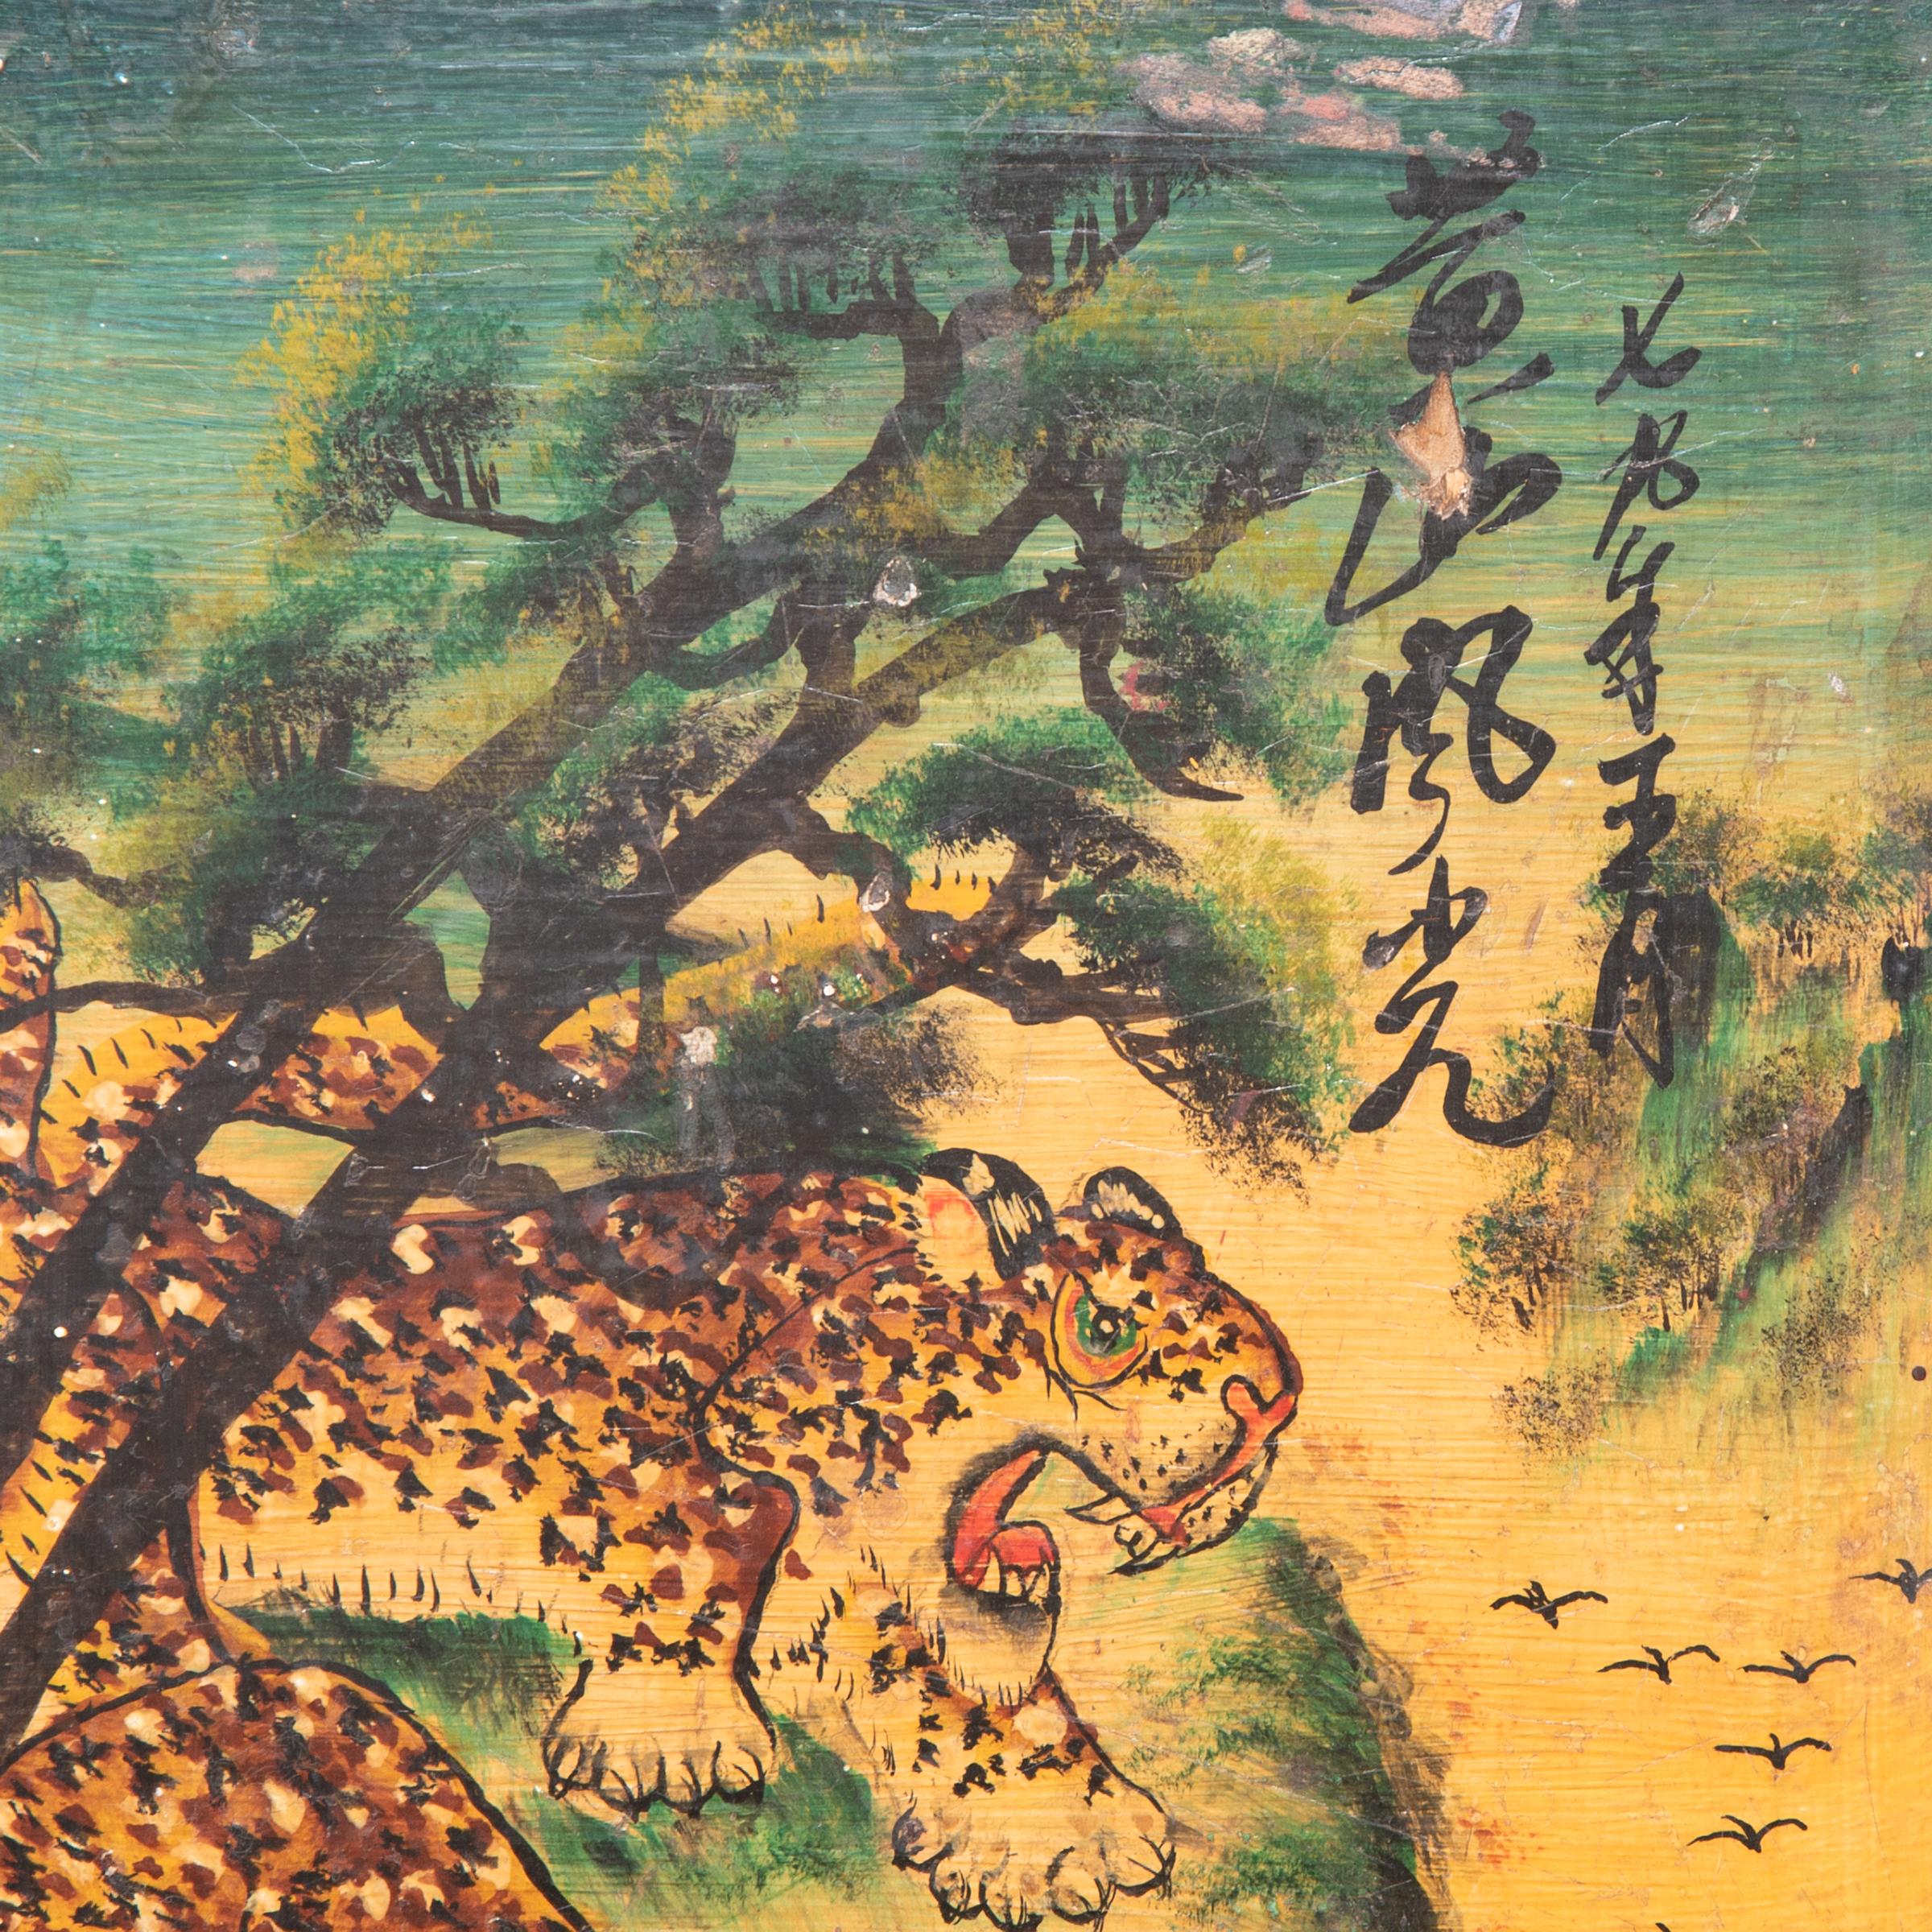 Created in the 1970s just as China was beginning its ascent as a global economic force, this painted panel based on a mythological tale seems to foretell the nation’s strength and power. Pictured in what is described as a “yellow mountain